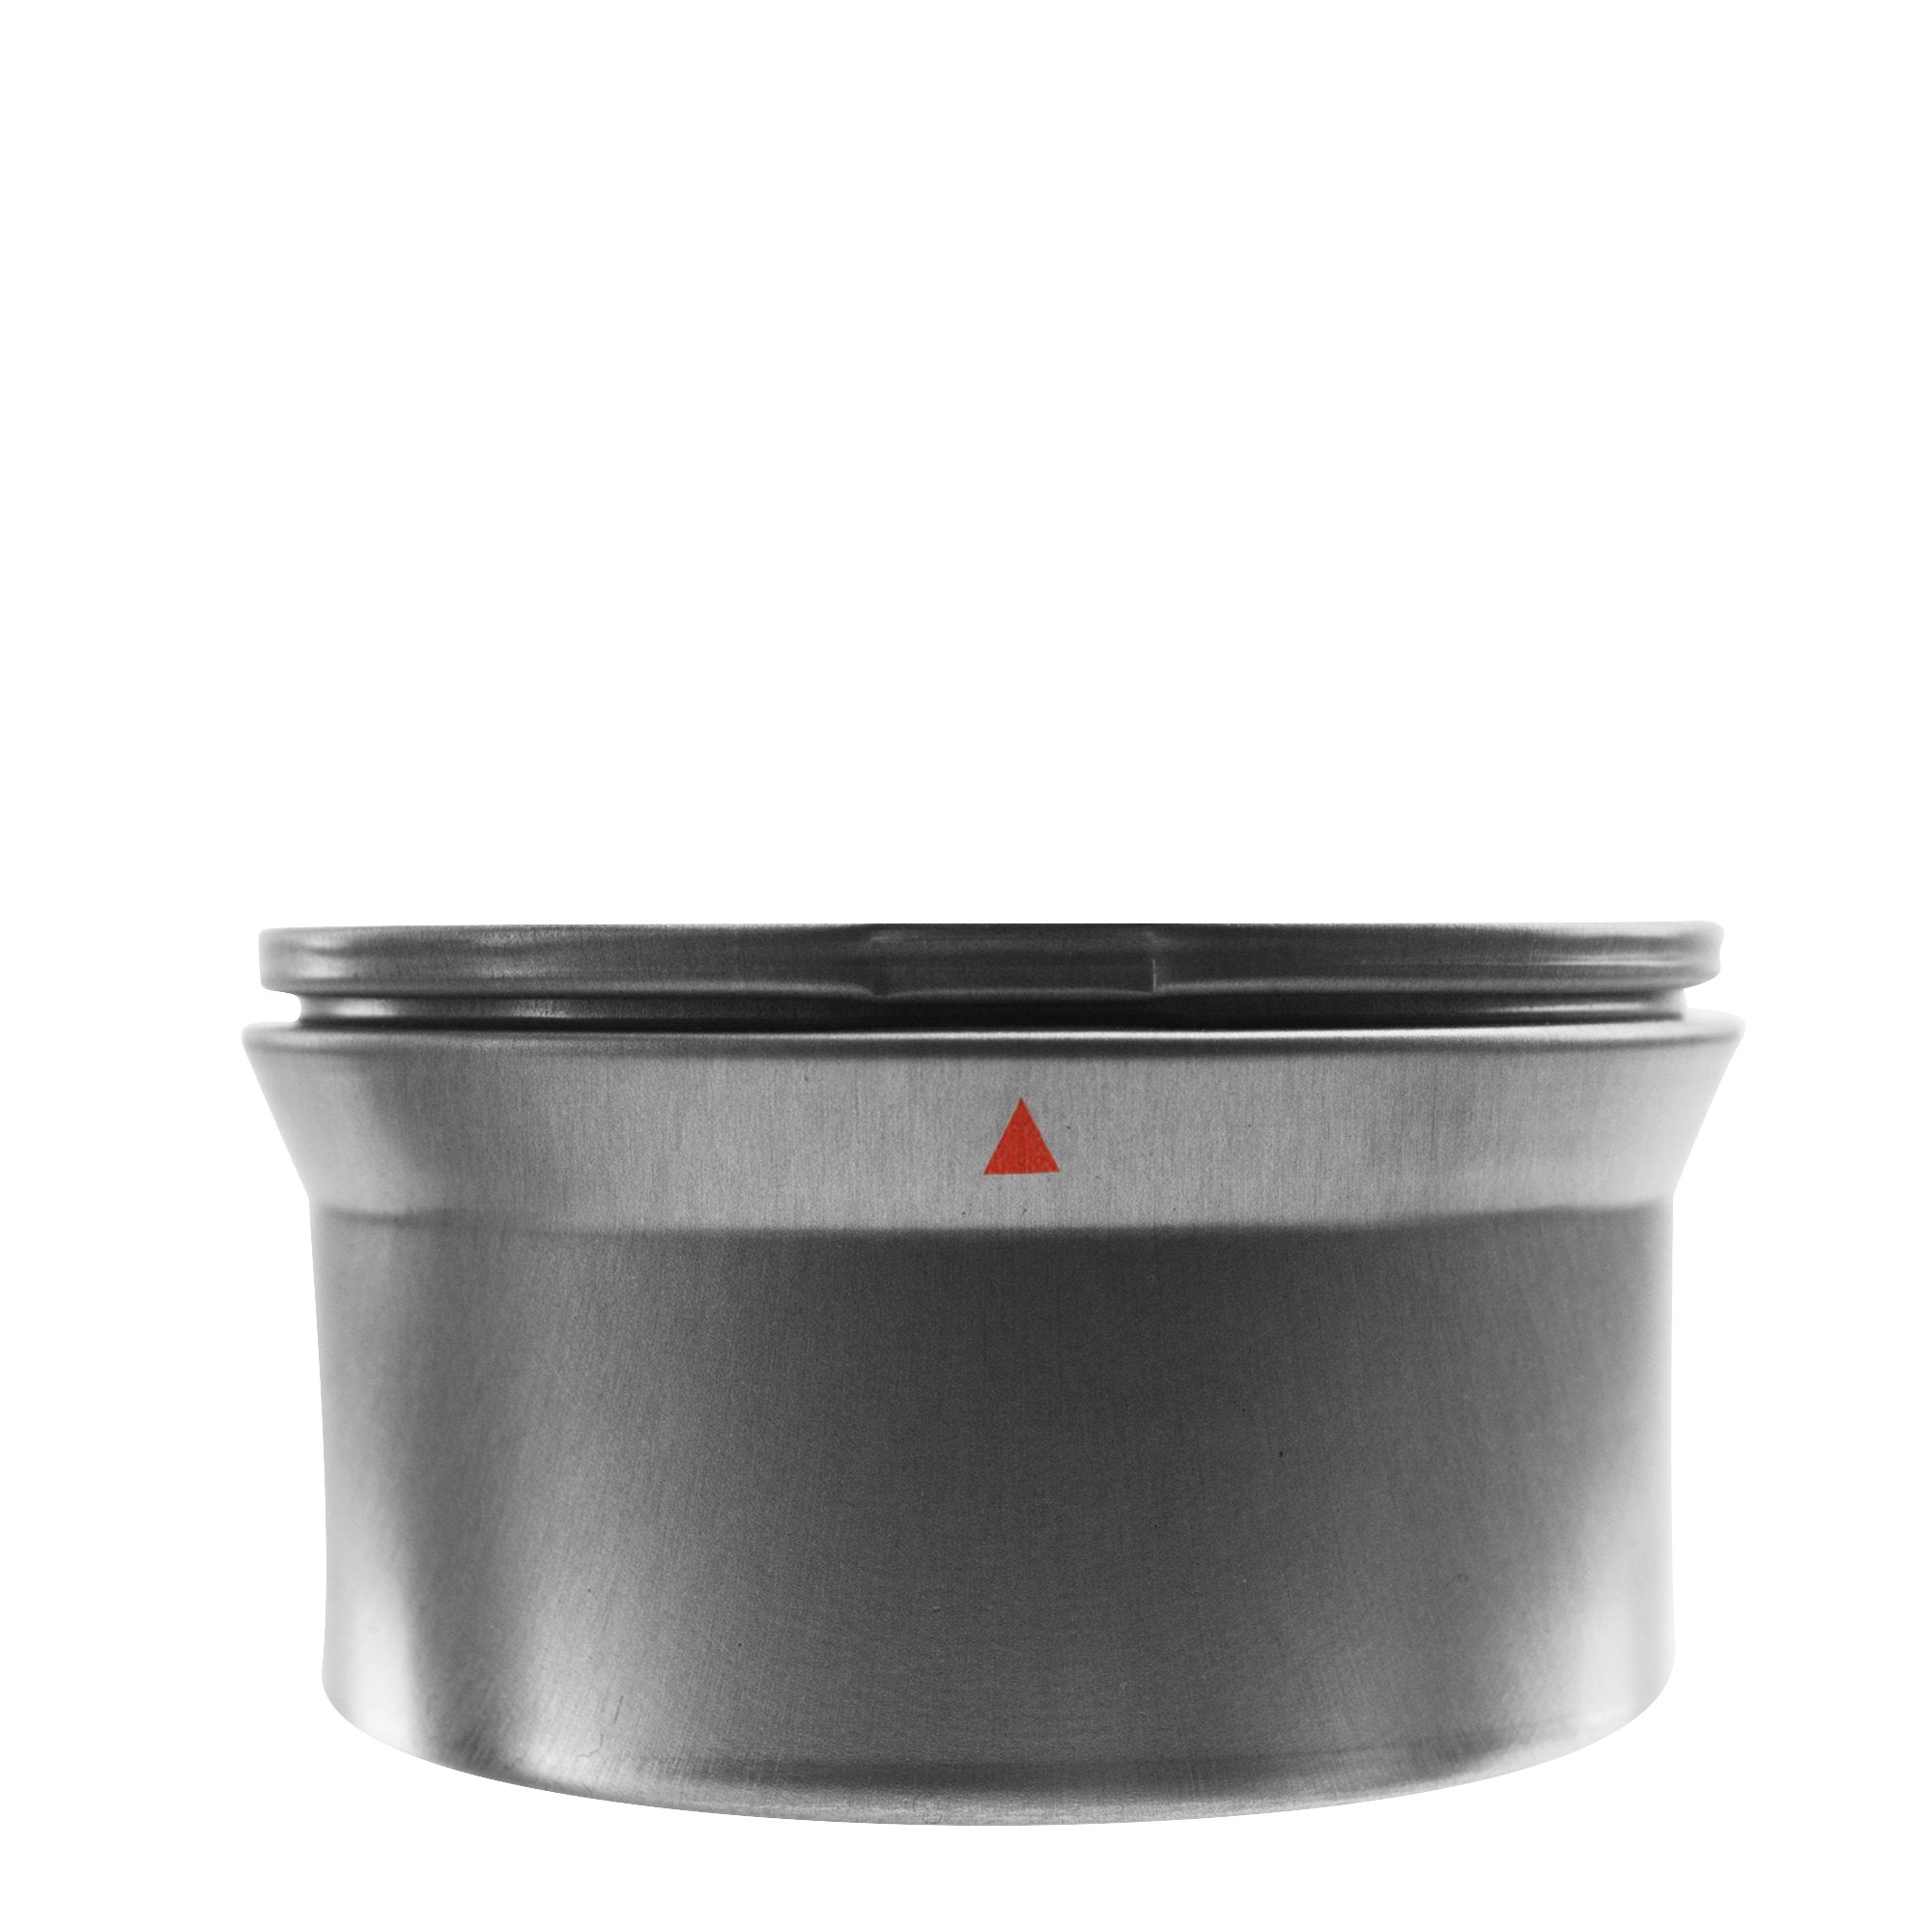 Child Resistant | Custom Safely Lock Sentinel Tin with Cap | Small and Medium - Brushed Metal - 7